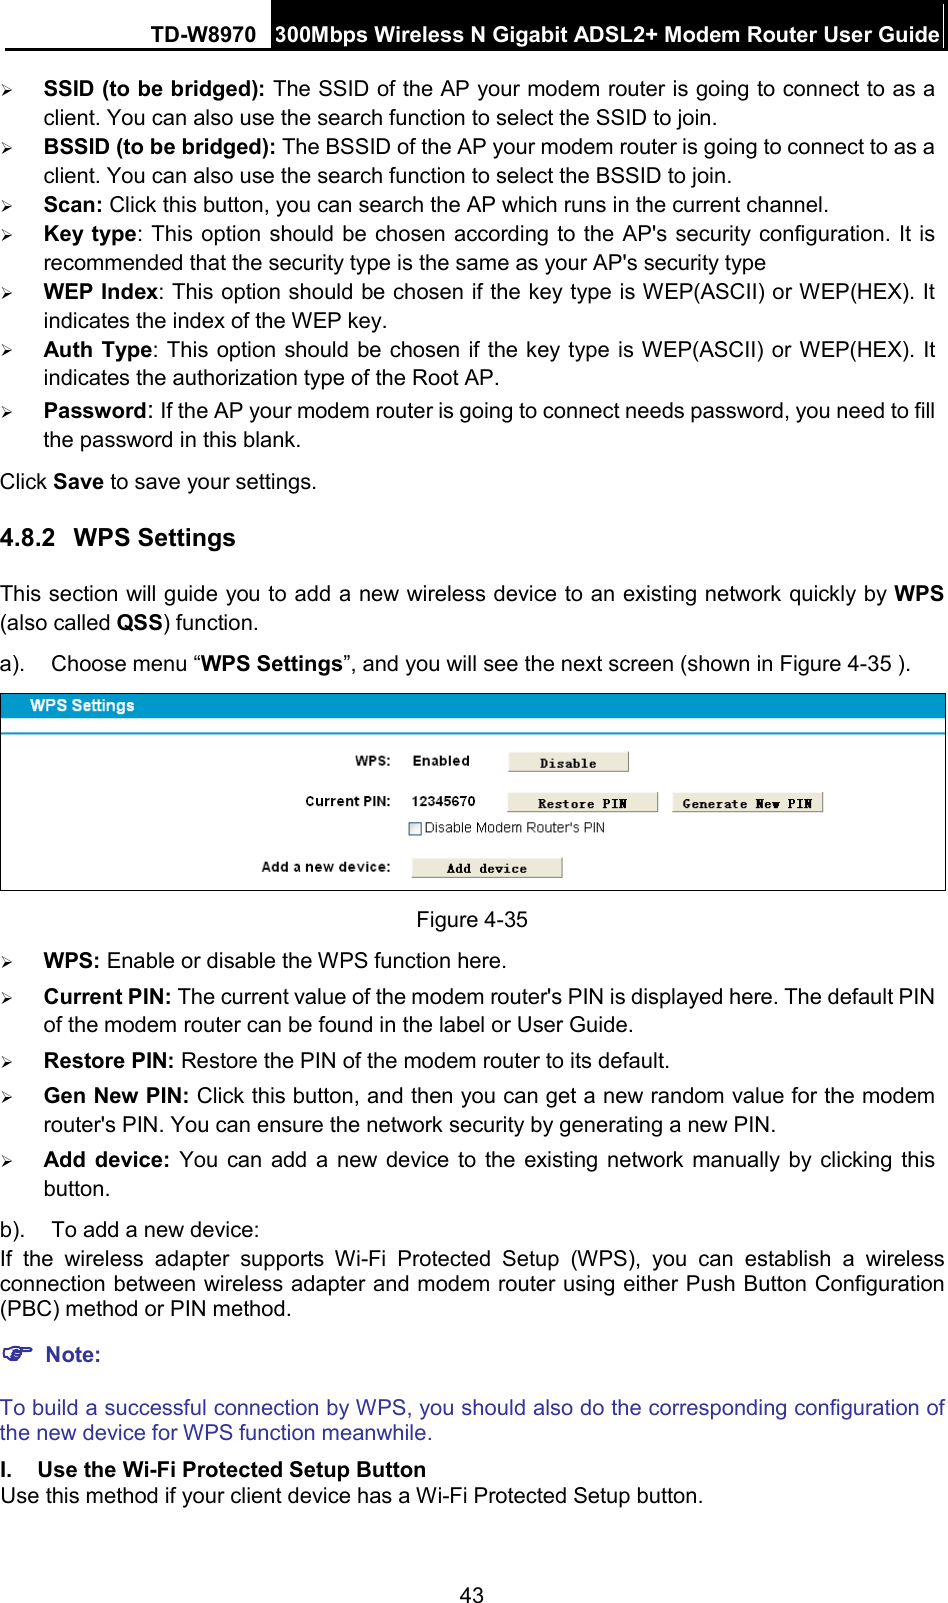 TD-W8970 300Mbps Wireless N Gigabit ADSL2+ Modem Router User Guide   SSID (to be bridged): The SSID of the AP your modem router is going to connect to as a client. You can also use the search function to select the SSID to join.  BSSID (to be bridged): The BSSID of the AP your modem router is going to connect to as a client. You can also use the search function to select the BSSID to join.  Scan: Click this button, you can search the AP which runs in the current channel.  Key type: This option should be chosen according to the AP&apos;s security configuration. It is recommended that the security type is the same as your AP&apos;s security type  WEP Index: This option should be chosen if the key type is WEP(ASCII) or WEP(HEX). It indicates the index of the WEP key.  Auth Type: This option should be chosen if the key type is WEP(ASCII) or WEP(HEX). It indicates the authorization type of the Root AP.  Password: If the AP your modem router is going to connect needs password, you need to fill the password in this blank. Click Save to save your settings. 4.8.2 WPS Settings This section will guide you to add a new wireless device to an existing network quickly by WPS (also called QSS) function. a). Choose menu “WPS Settings”, and you will see the next screen (shown in Figure 4-35 ).    Figure 4-35  WPS: Enable or disable the WPS function here.    Current PIN: The current value of the modem router&apos;s PIN is displayed here. The default PIN of the modem router can be found in the label or User Guide.    Restore PIN: Restore the PIN of the modem router to its default.    Gen New PIN: Click this button, and then you can get a new random value for the modem router&apos;s PIN. You can ensure the network security by generating a new PIN.  Add  device:  You can add a  new device to the existing network manually by clicking this button. b). To add a new device: If the wireless adapter supports Wi-Fi Protected Setup (WPS), you can establish a wireless connection between wireless adapter and modem router using either Push Button Configuration (PBC) method or PIN method.  Note: To build a successful connection by WPS, you should also do the corresponding configuration of the new device for WPS function meanwhile. I. Use the Wi-Fi Protected Setup Button Use this method if your client device has a Wi-Fi Protected Setup button. 43 